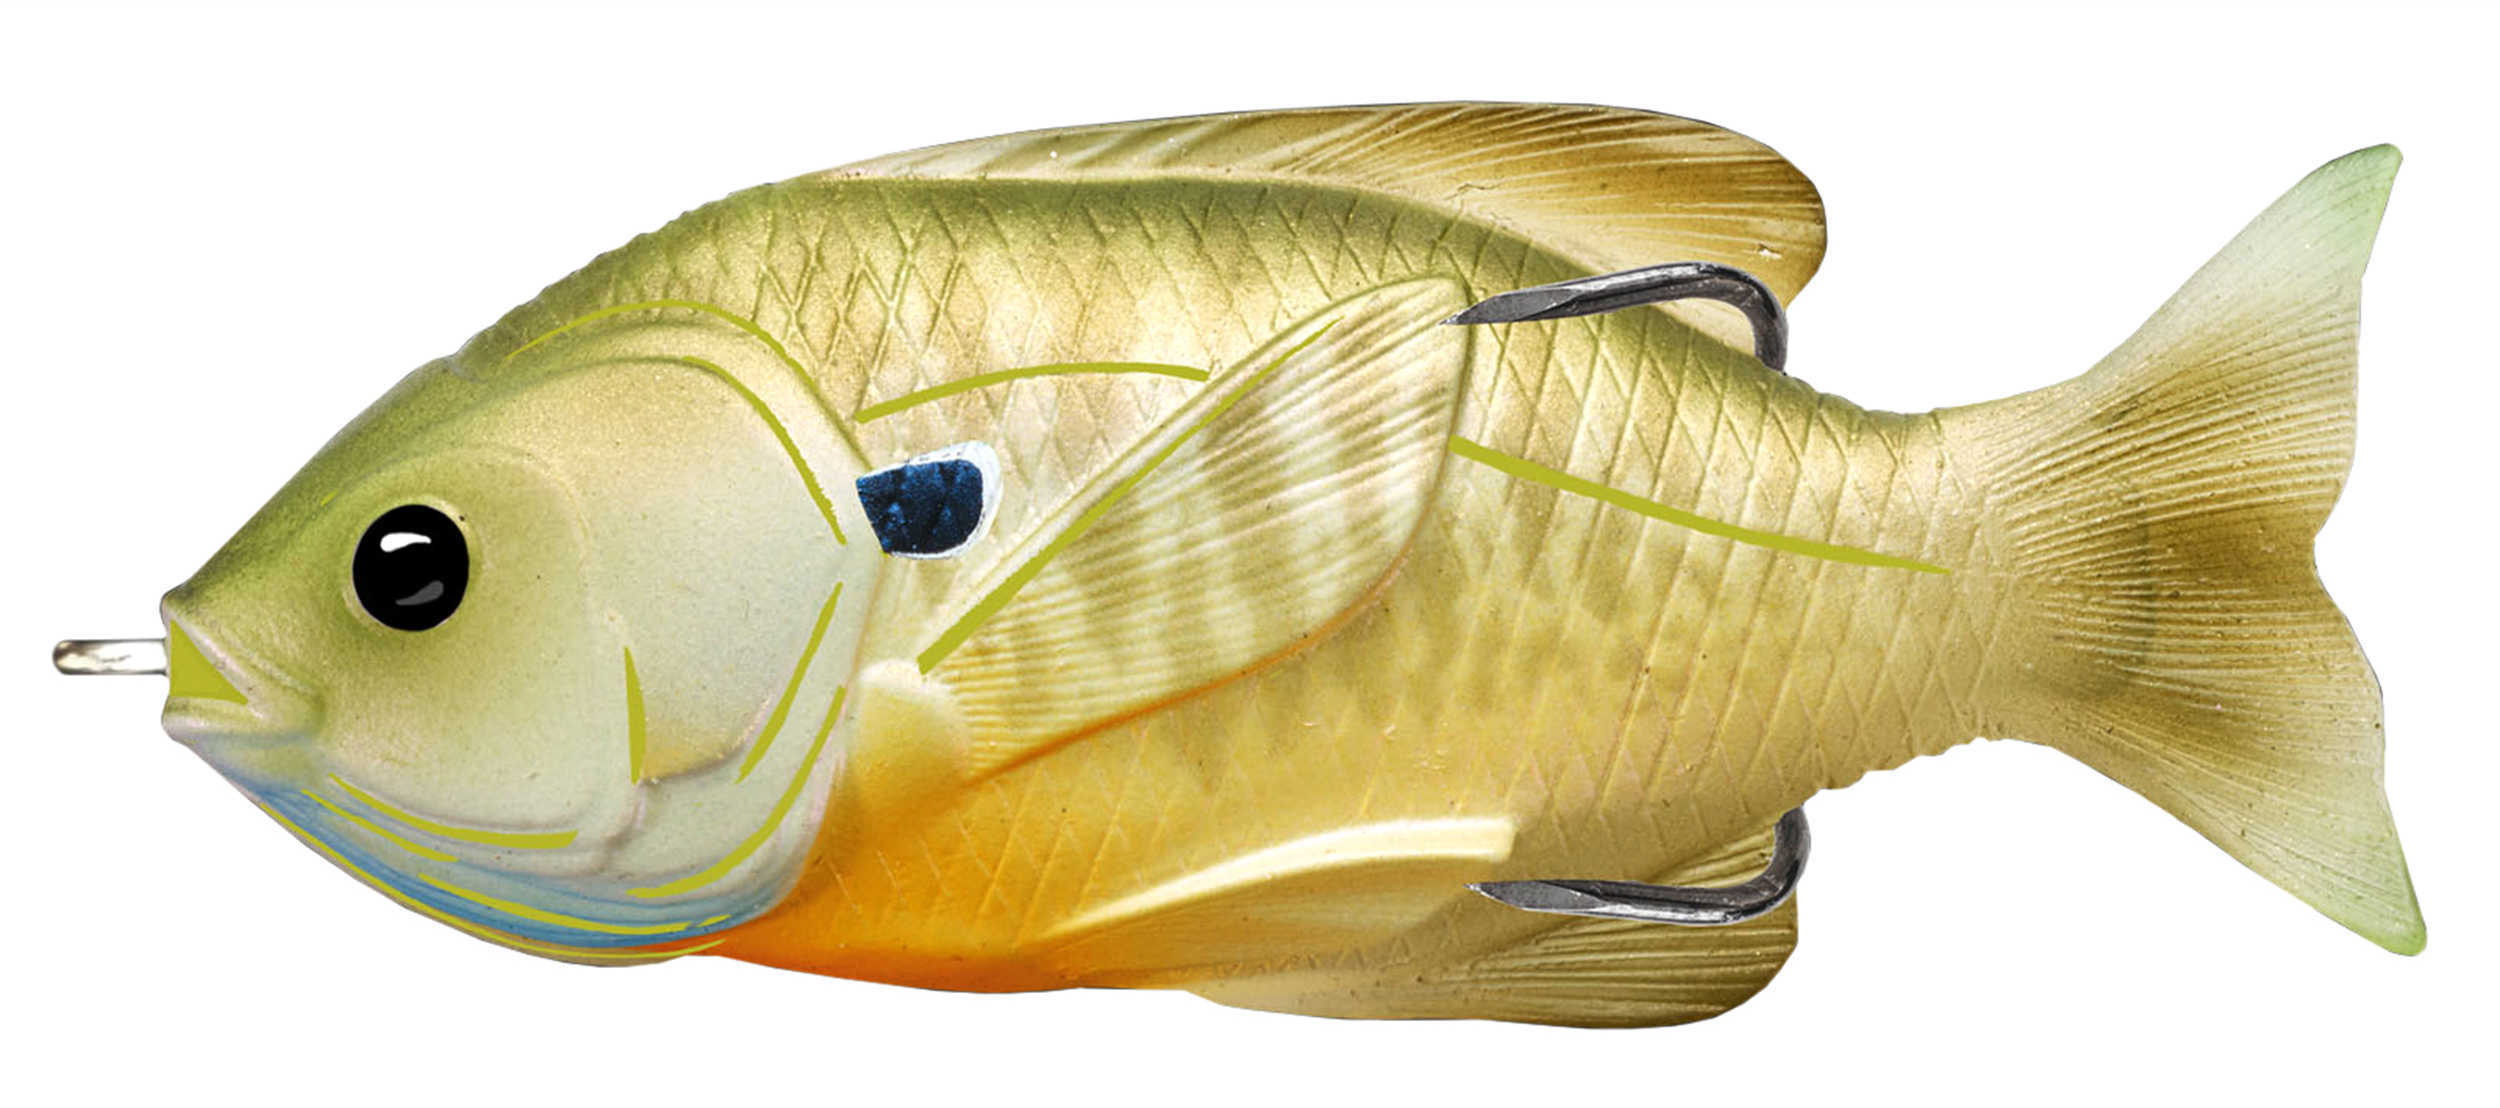 LiveTarget Lures Sunfish Hollow Body Freshwater, 4" Length, 3/4 oz, Topwater Depth, Natural Green Bluegill, Per 1 Md: SF